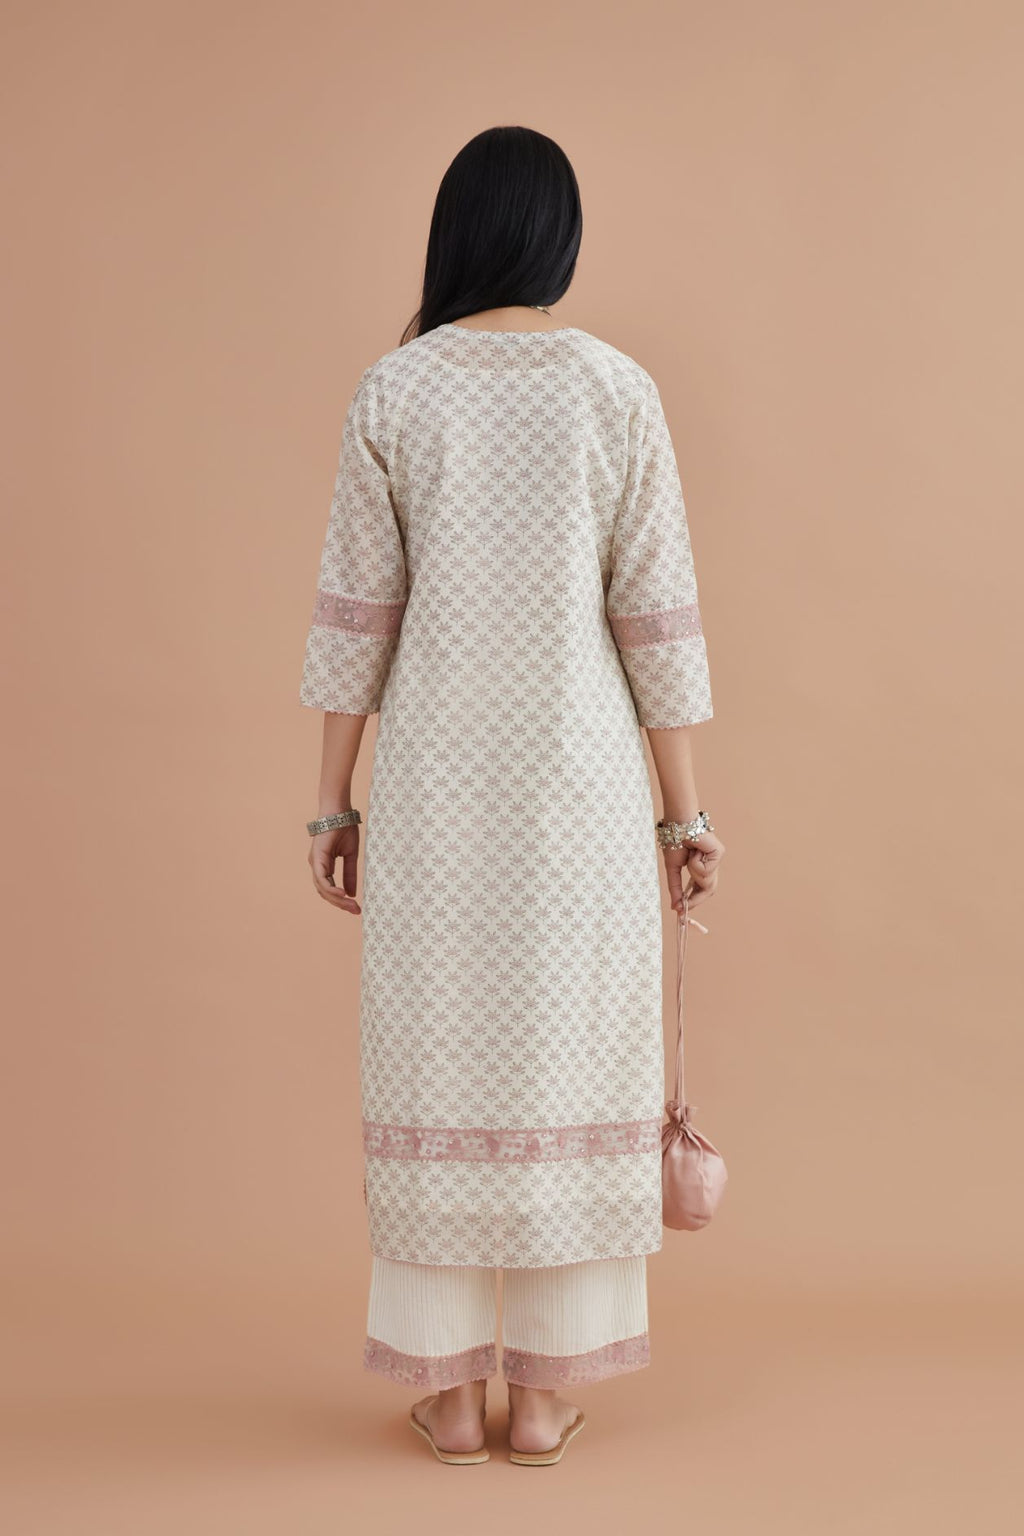 Off white silk chanderi kurta set with pink lotus hand block print, highlighted with pink thread embroidery inset and rickrack lace.